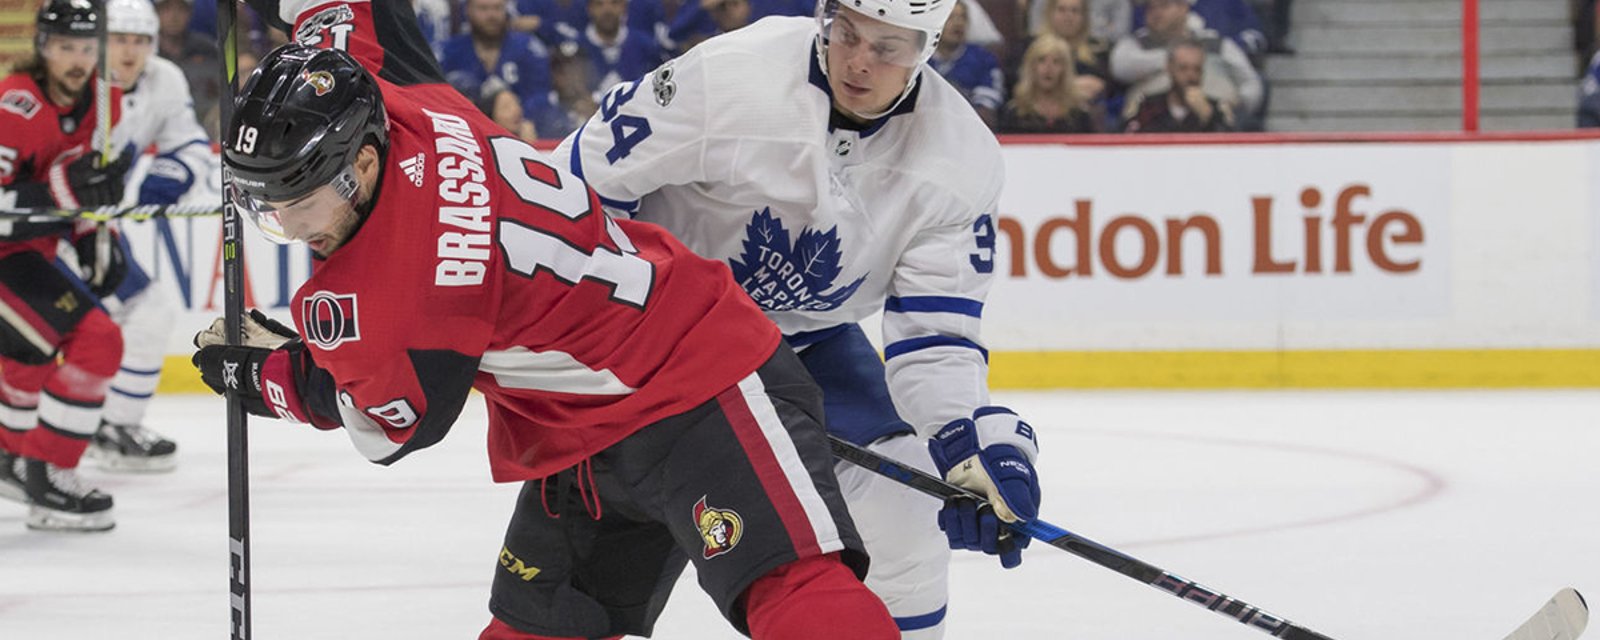 Must See: Leafs’ Matthews rips Sens after 6-3 loss